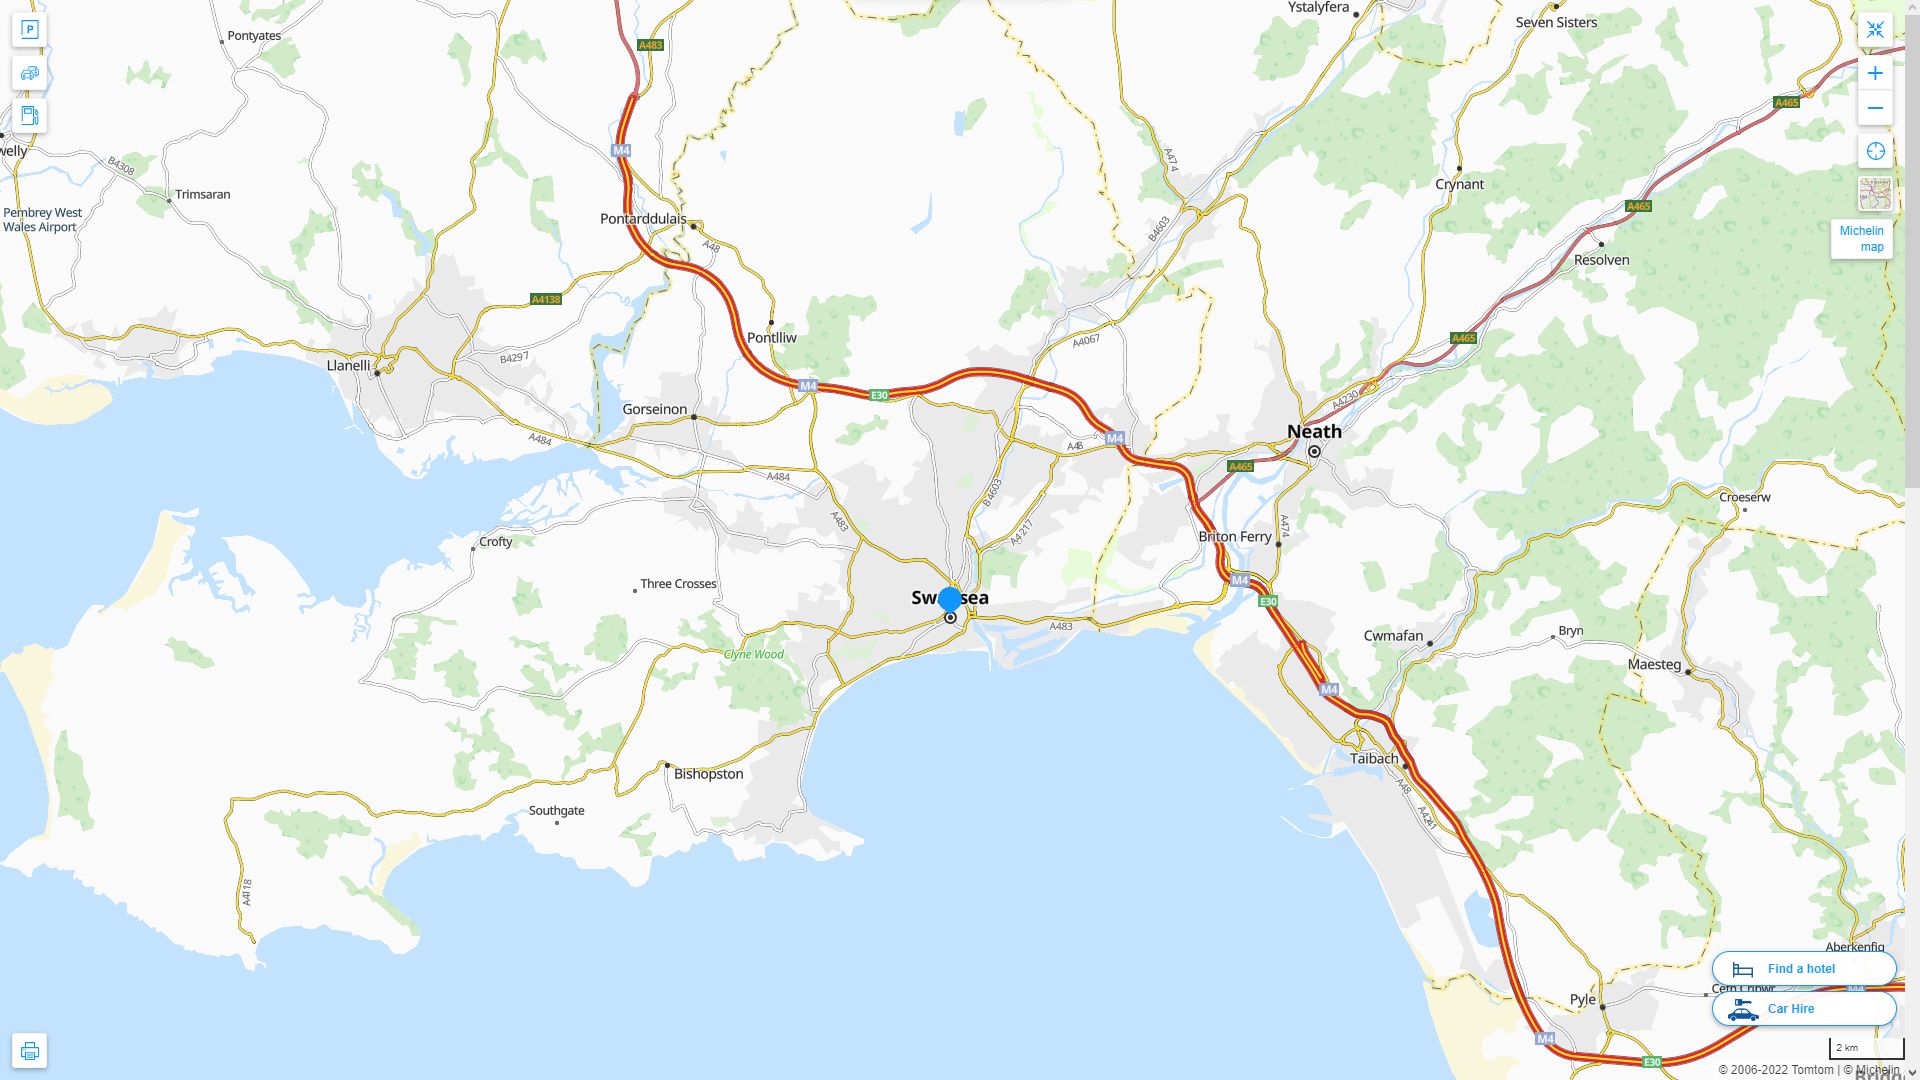 Swansea Highway and Road Map